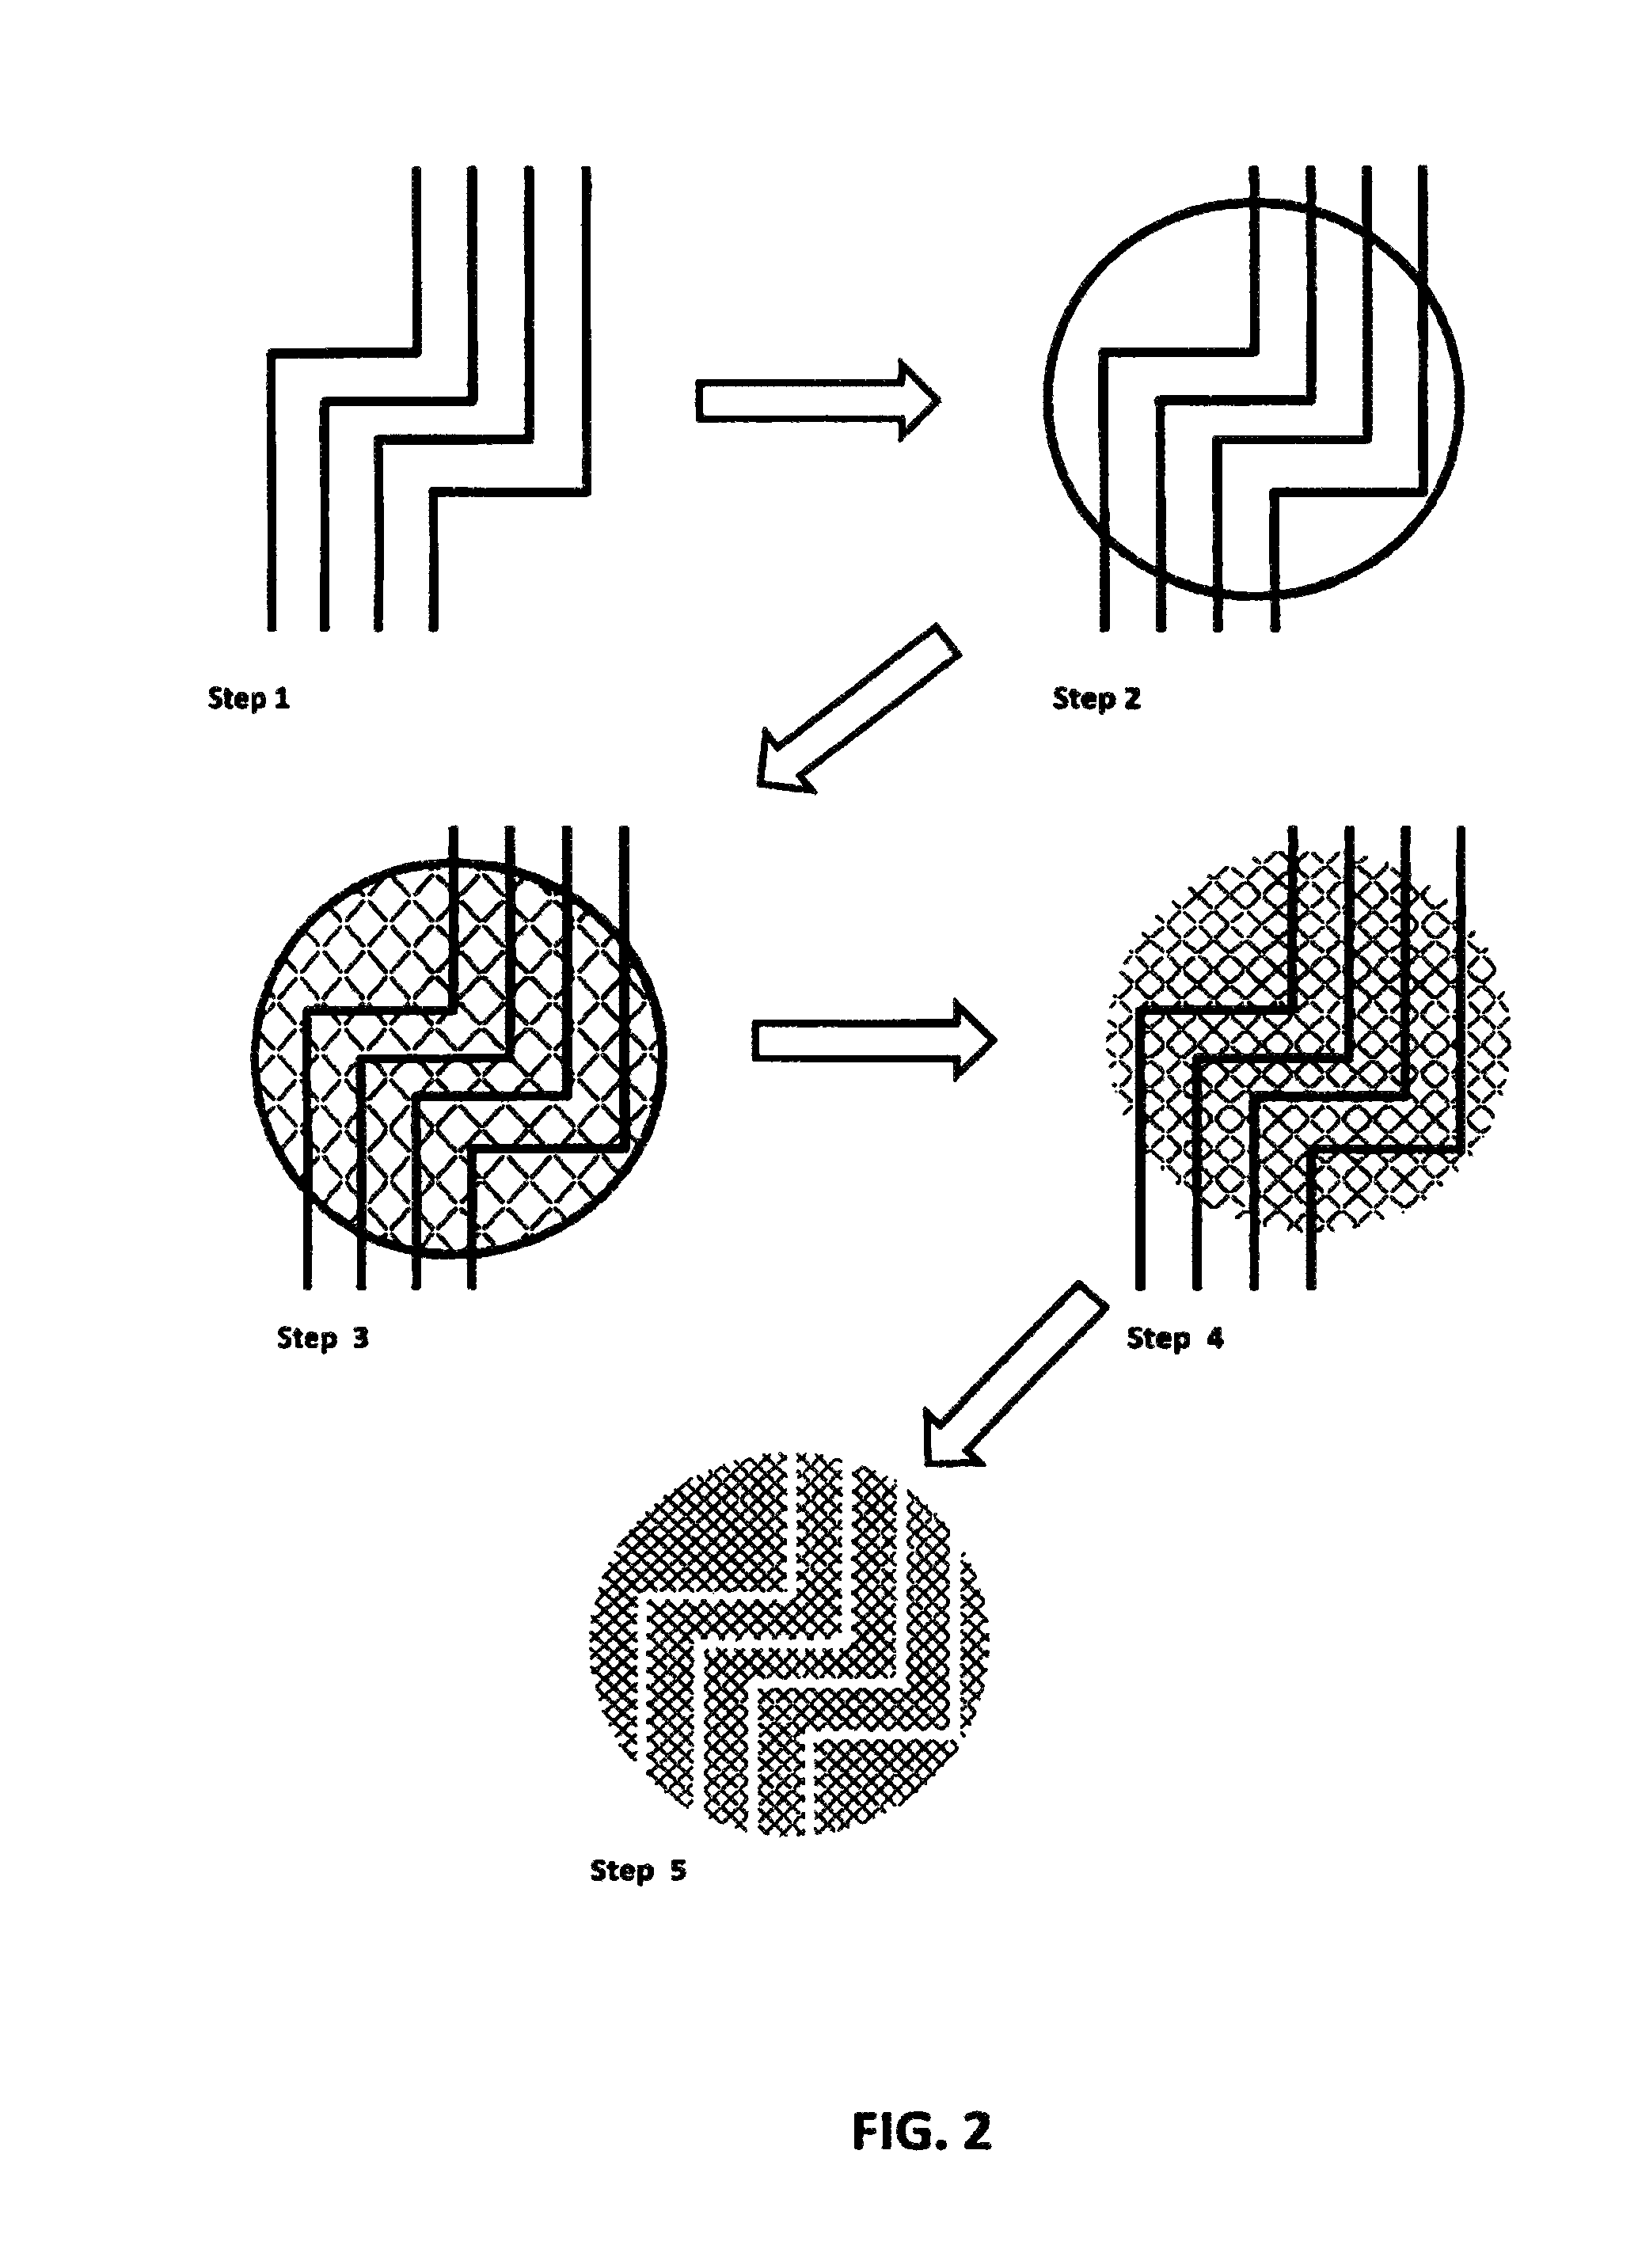 Method for producing bulk ceramic components from agglomerations of partially cured gelatinous polymer ceramic precursor resin droplets